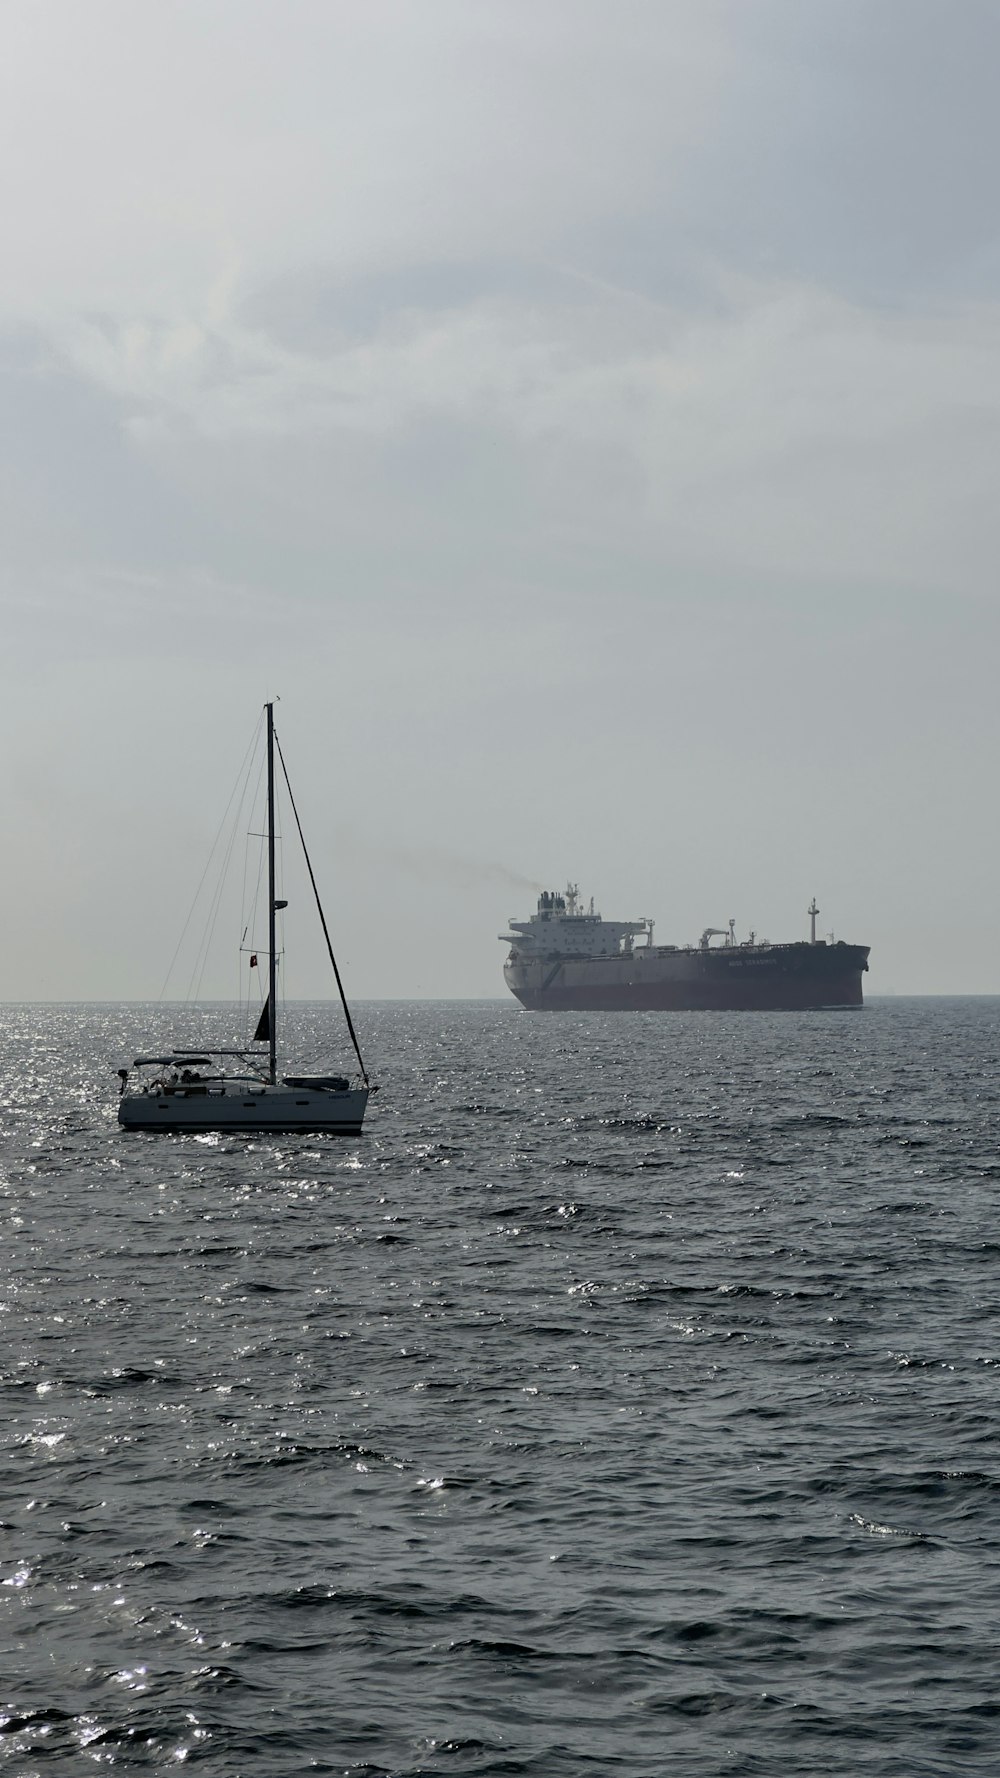 a sailboat in the ocean with a large ship in the background